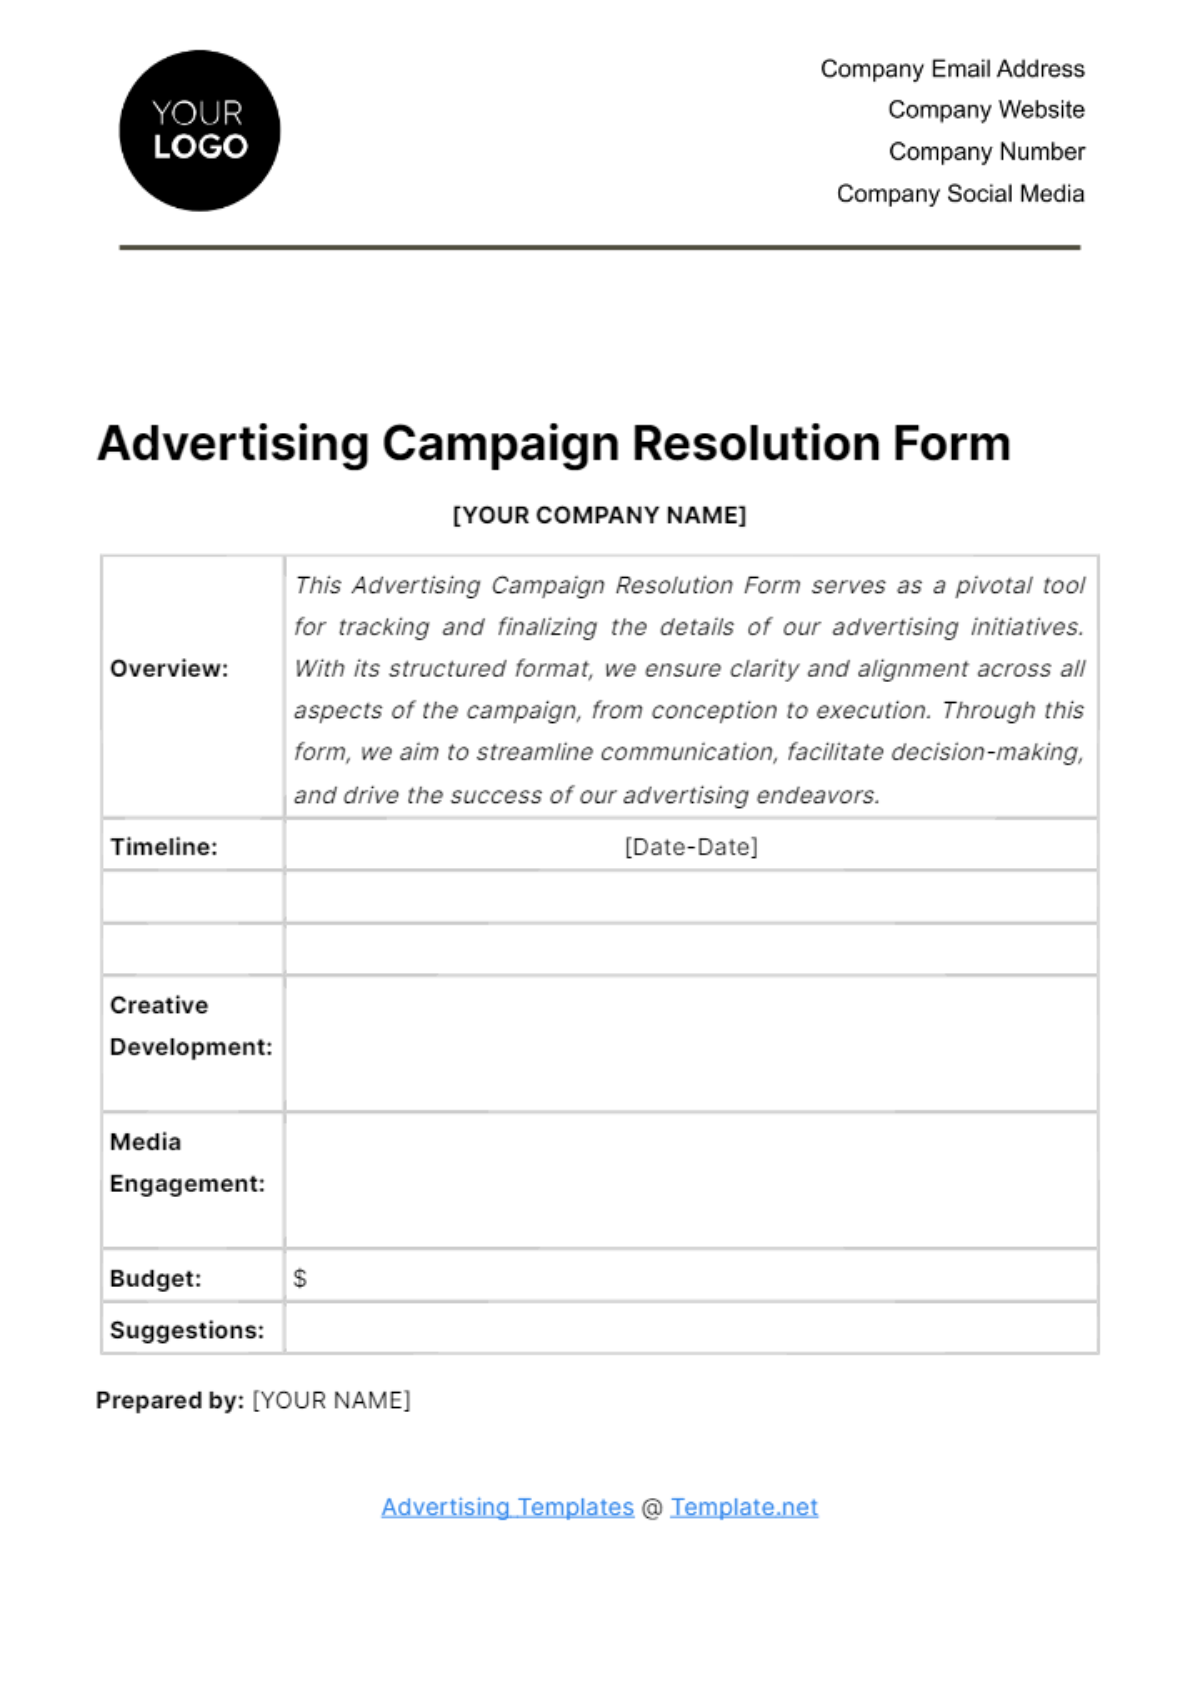 Free Advertising Campaign Resolution Form Template